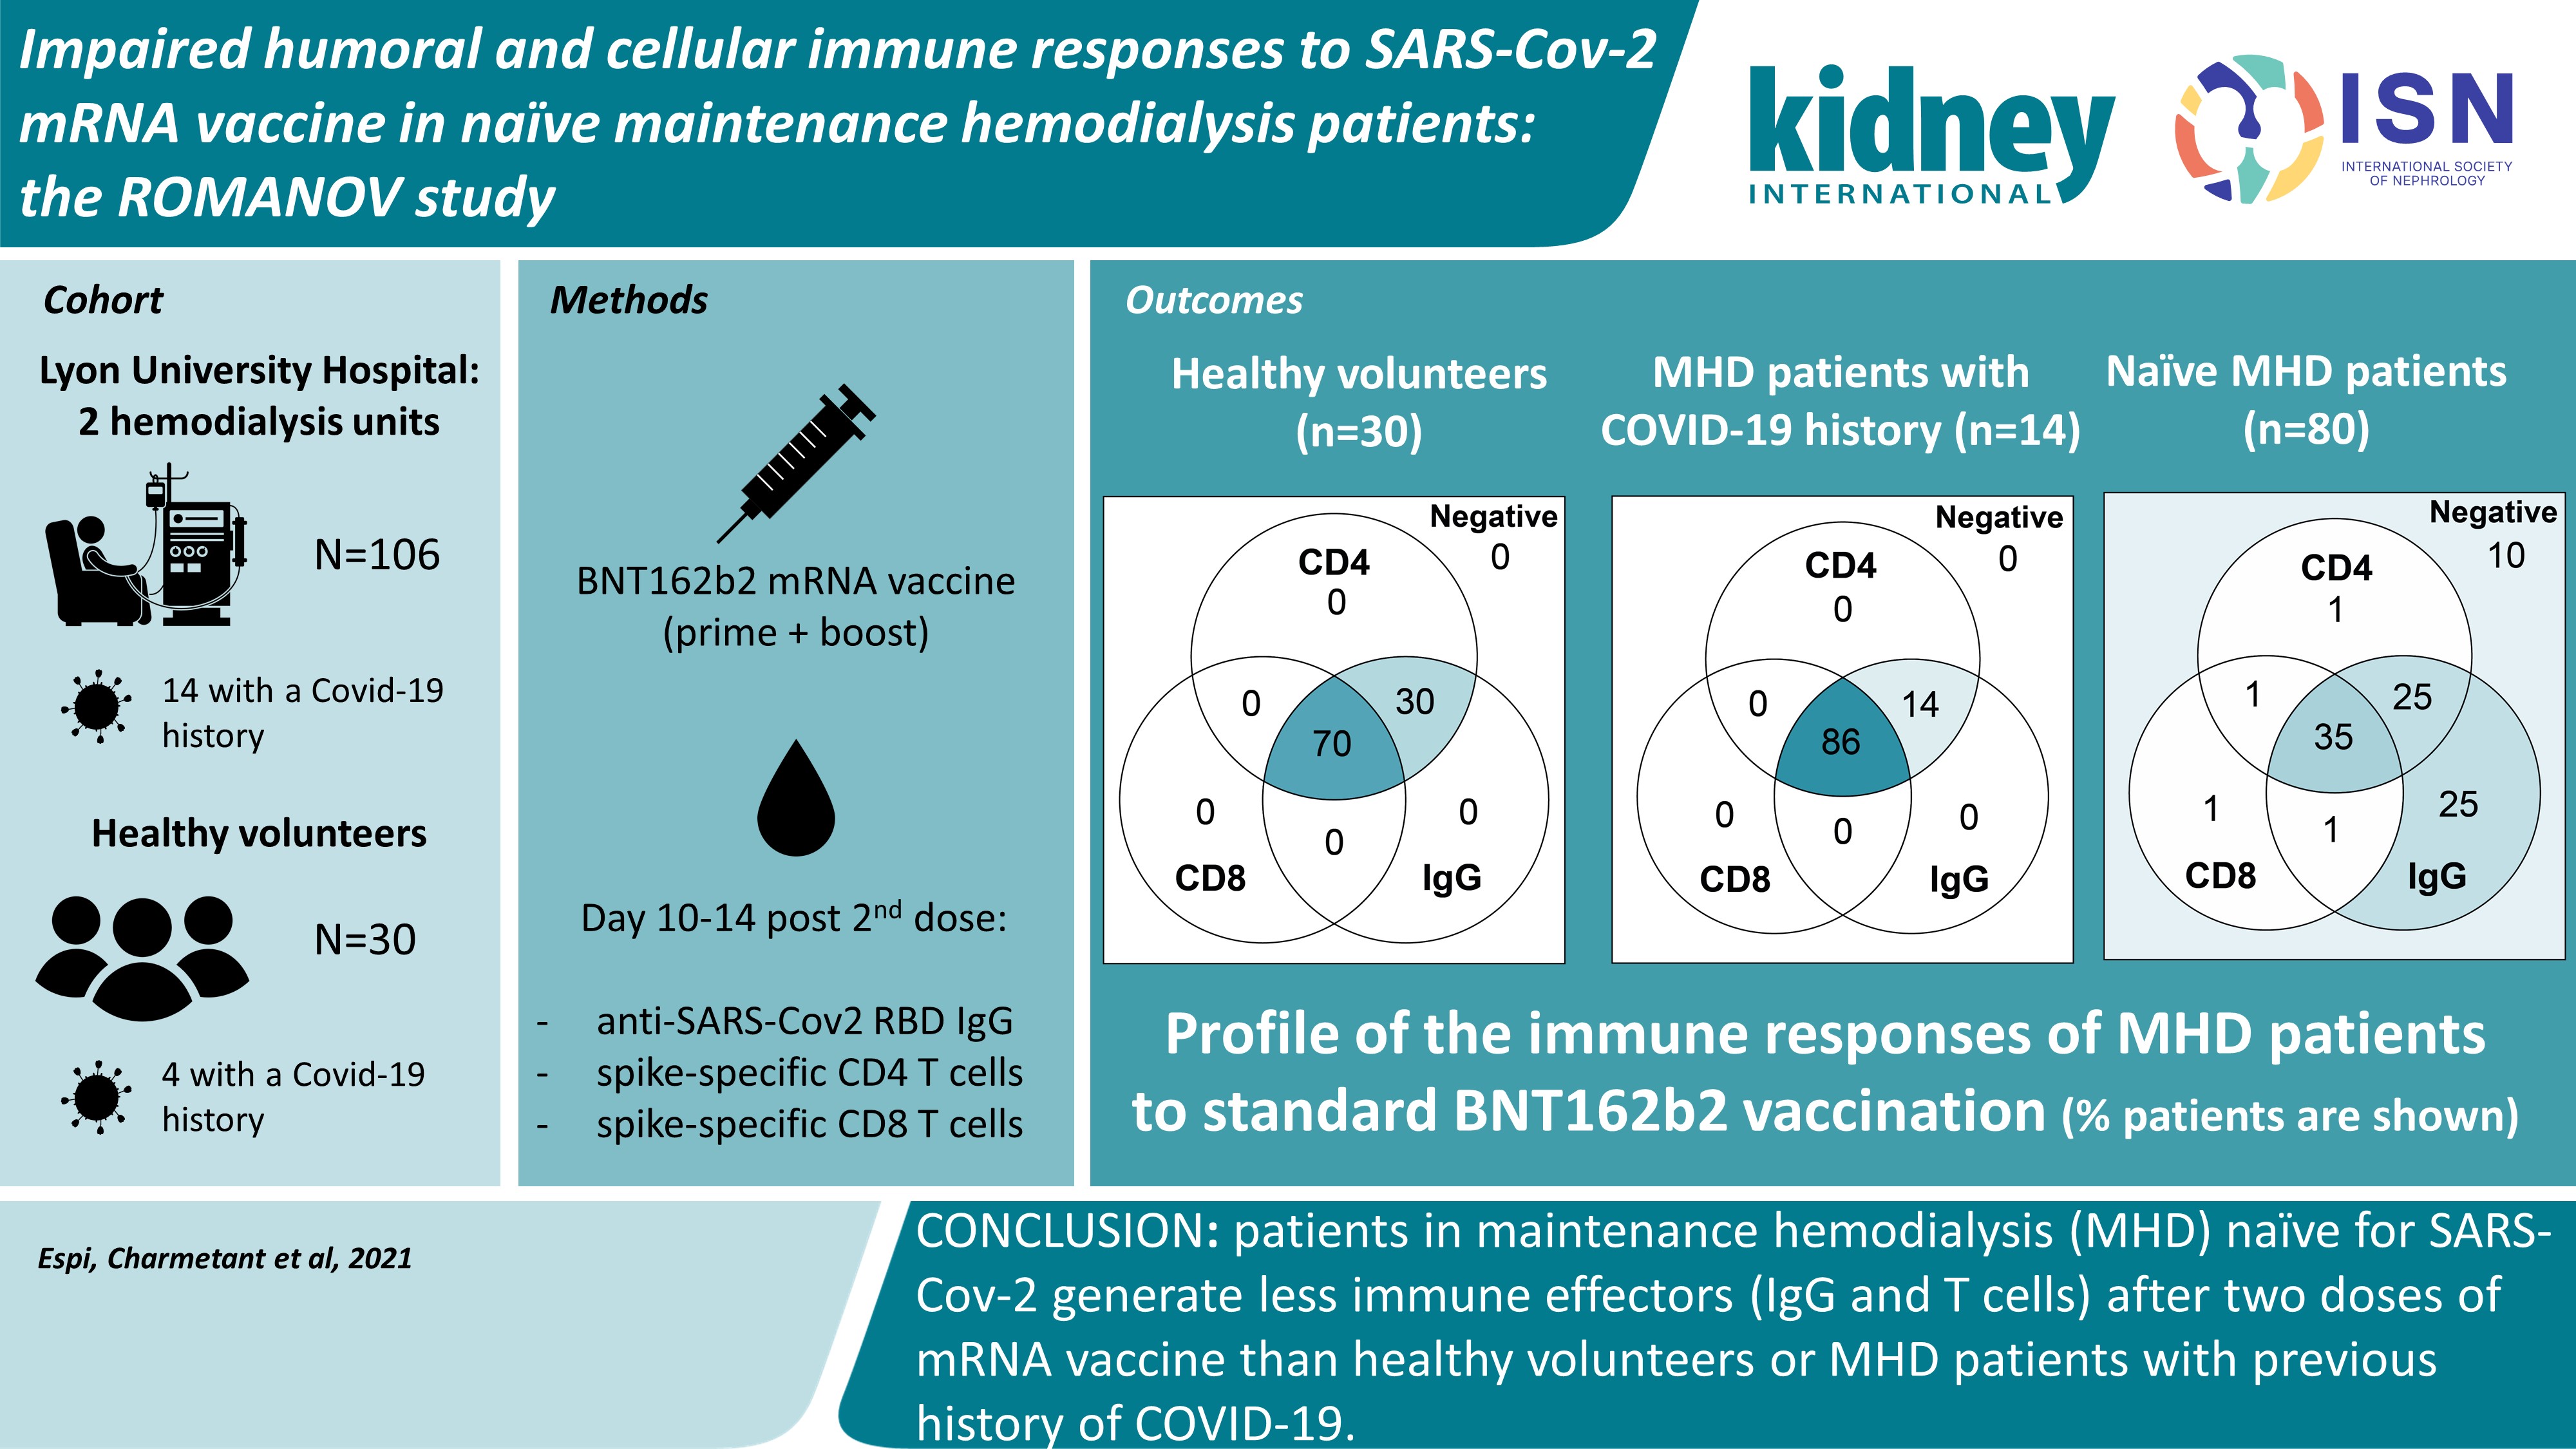 The ROMANOV study found impaired humoral and cellular immune responses to SARS-CoV-2 mRNA vaccine in virus-unexposed patients receiving maintenance hemodialysis